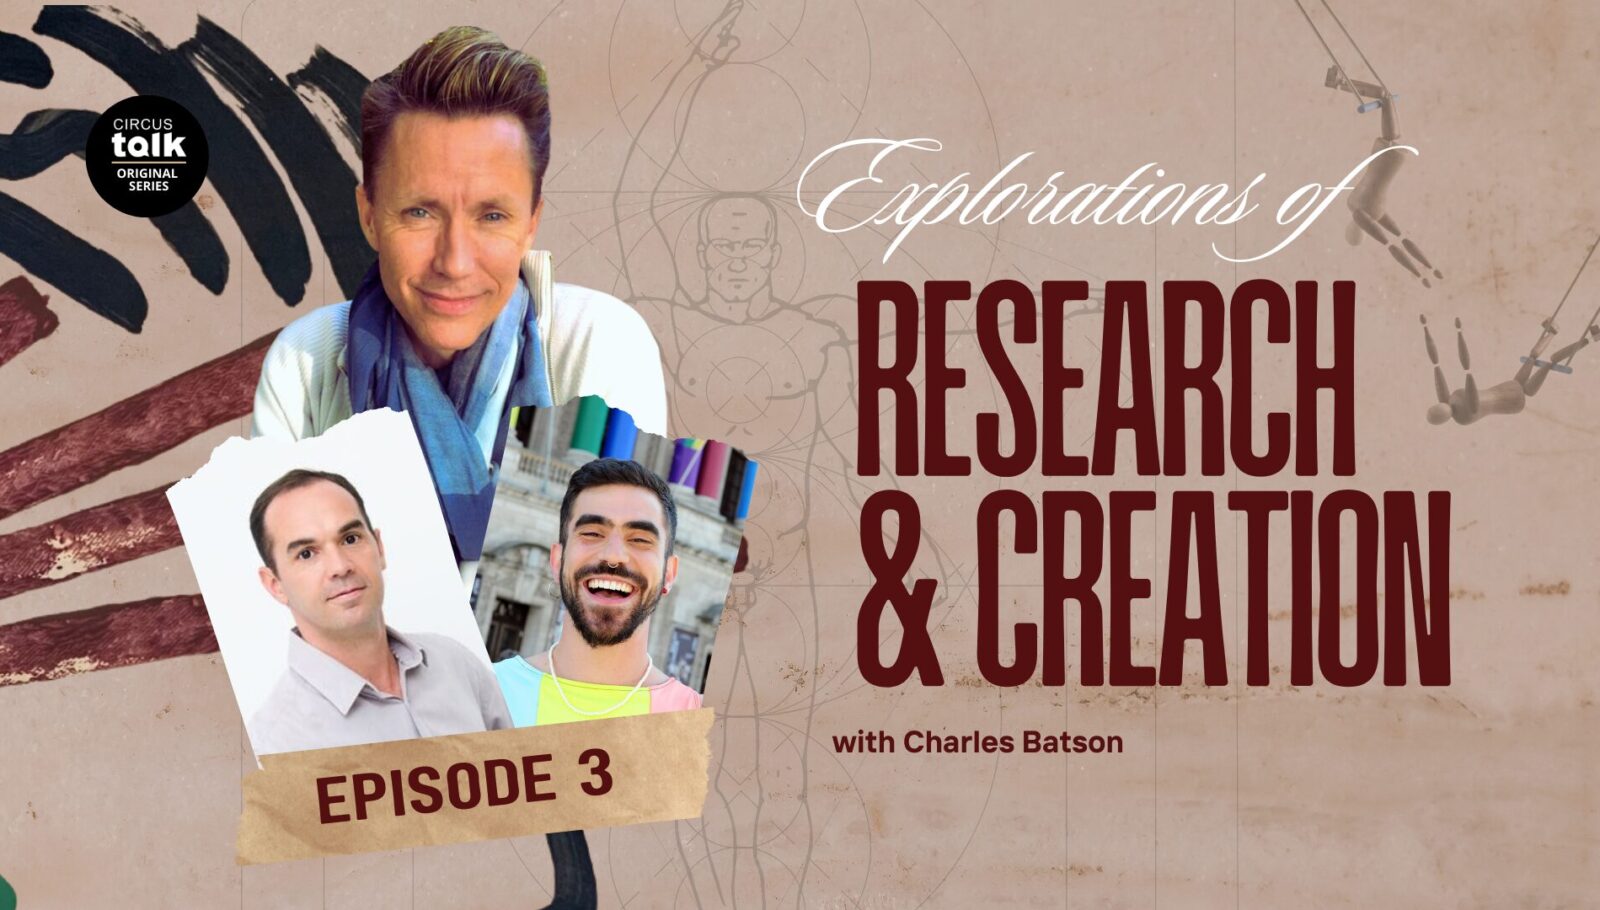 Explorations of Research and Creation with Charles Batson - Working Through Fear, Finding Hope & Ways of Being with Marco Bortoleto and Murilo Toledo